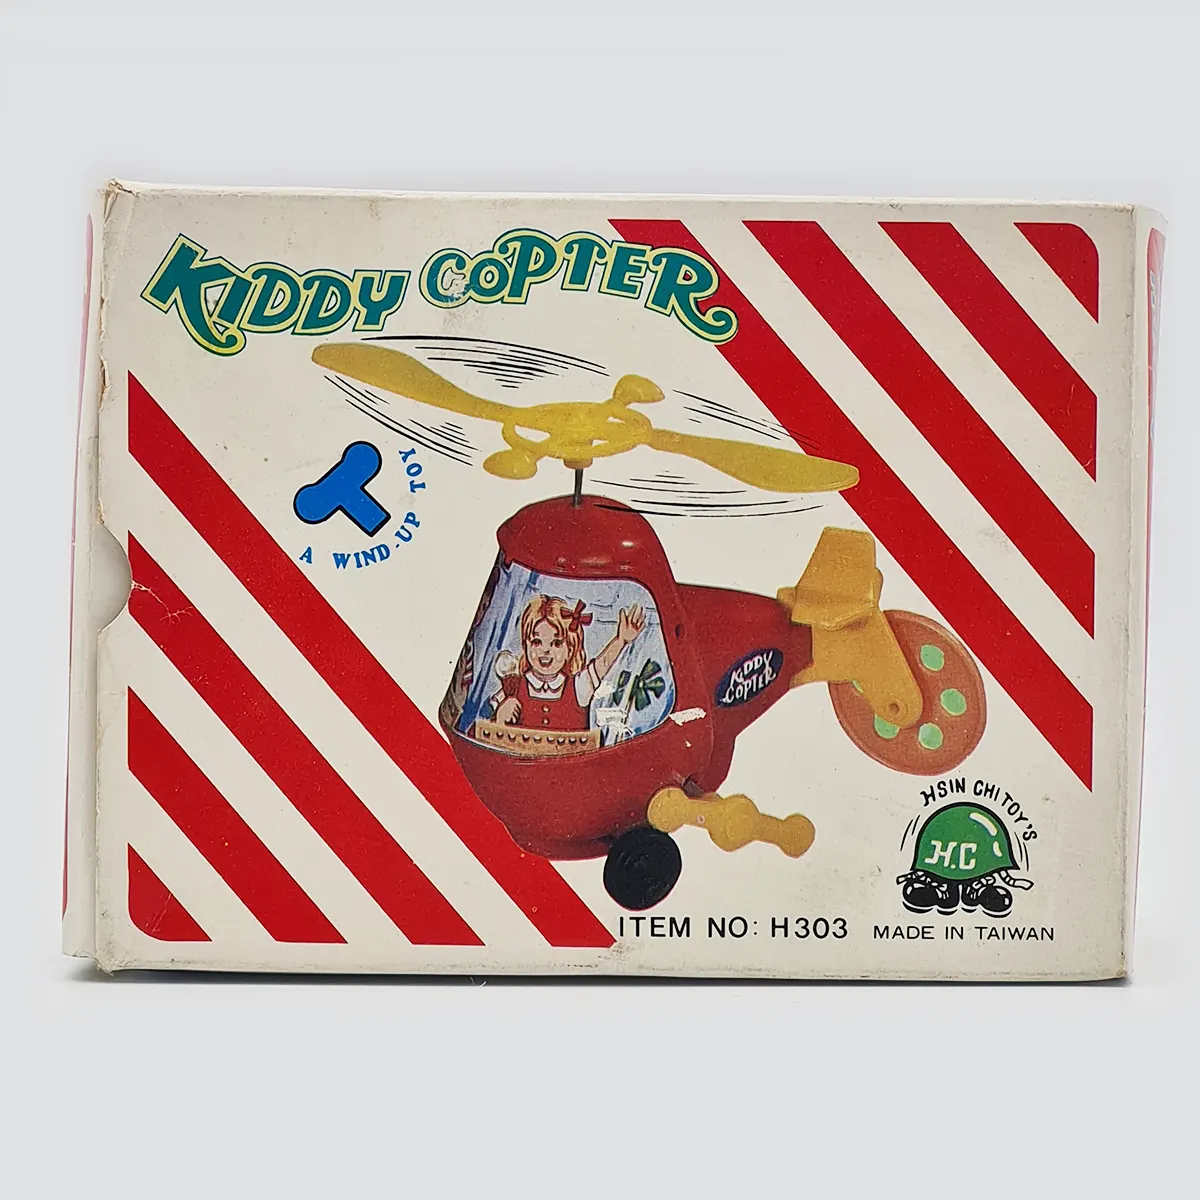 Kiddy Copter 1